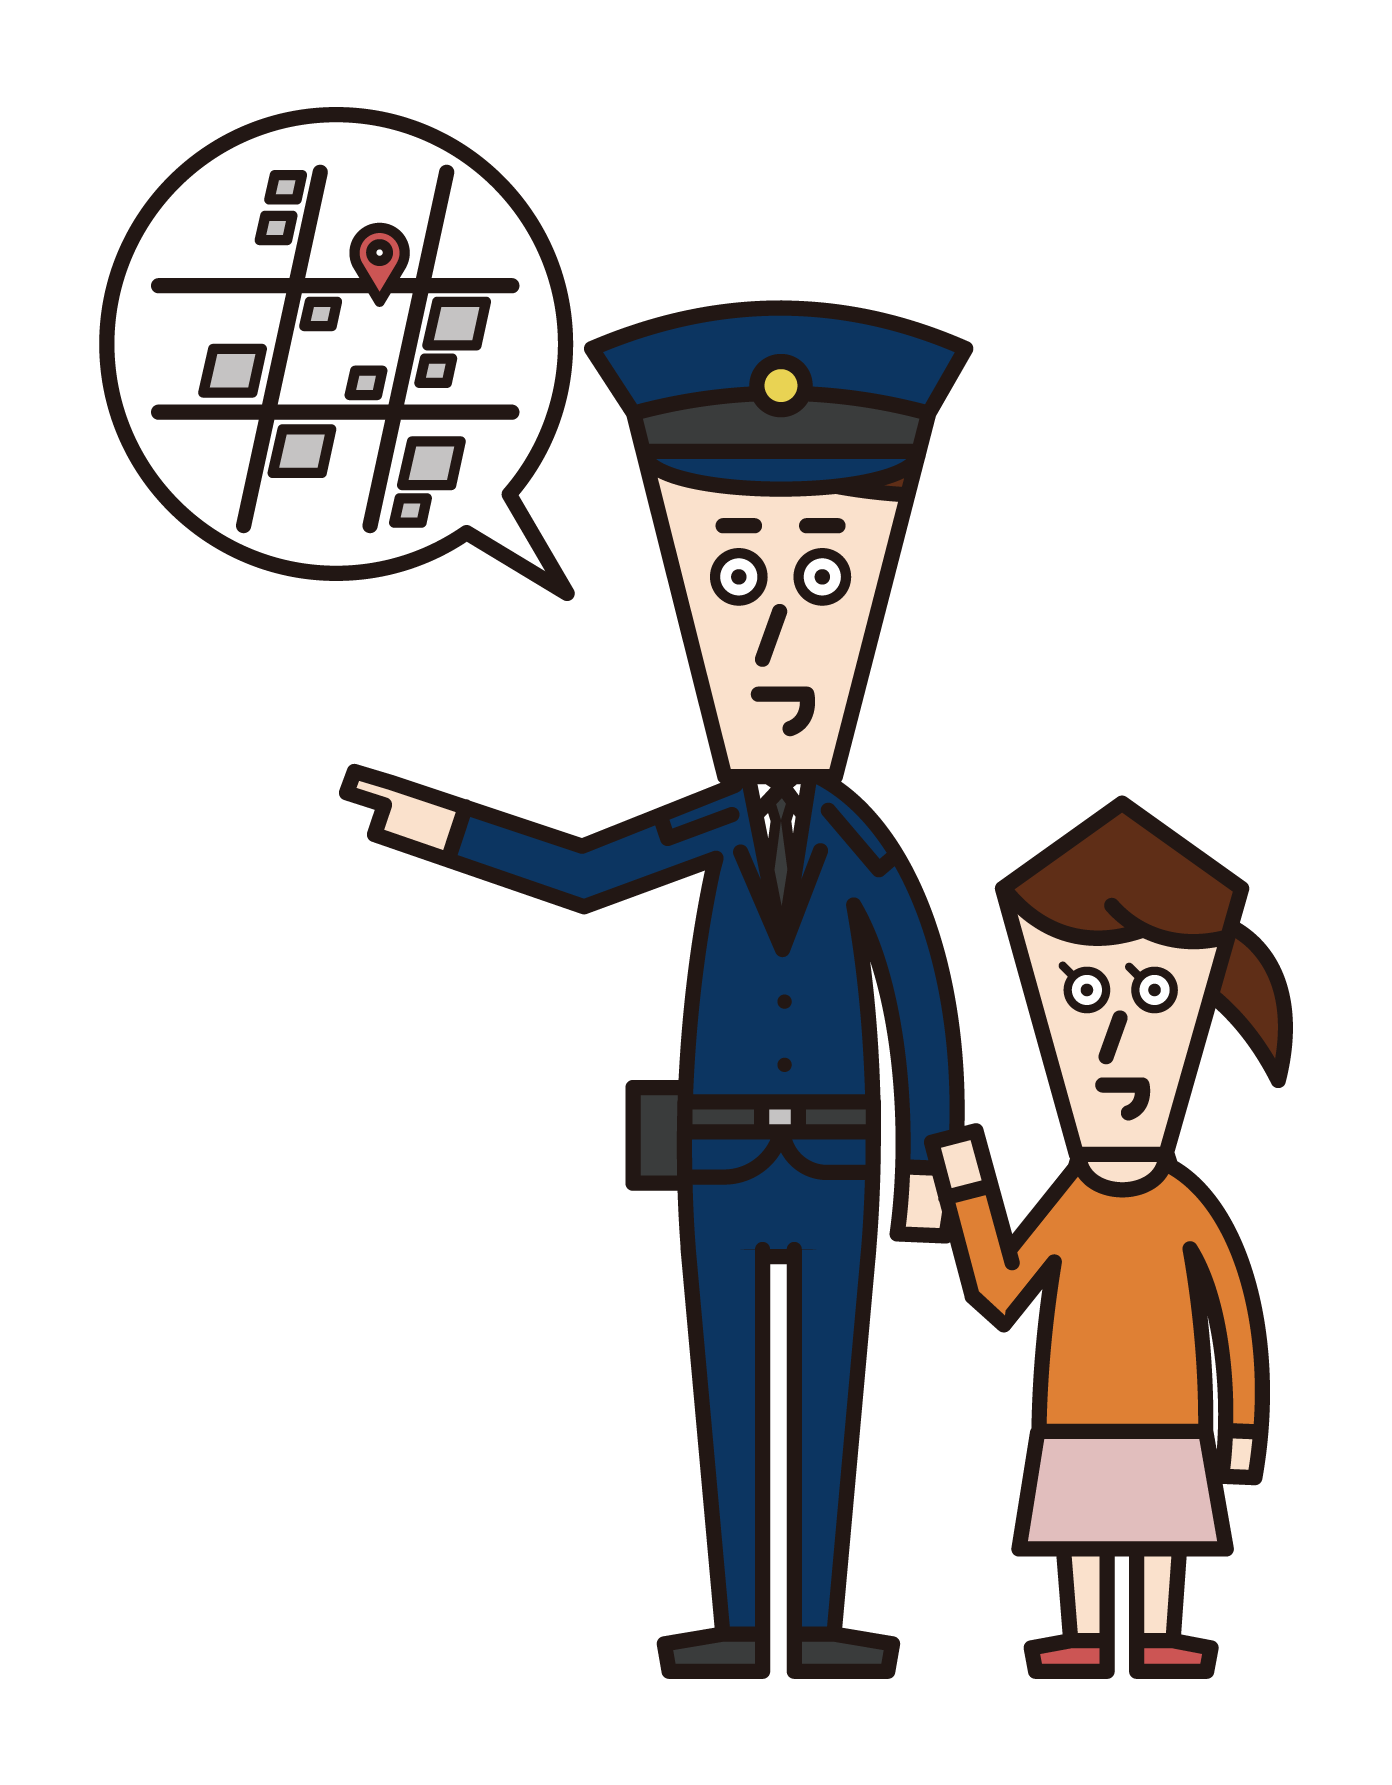 Illustration of a child (girl) asking a police officer for directions